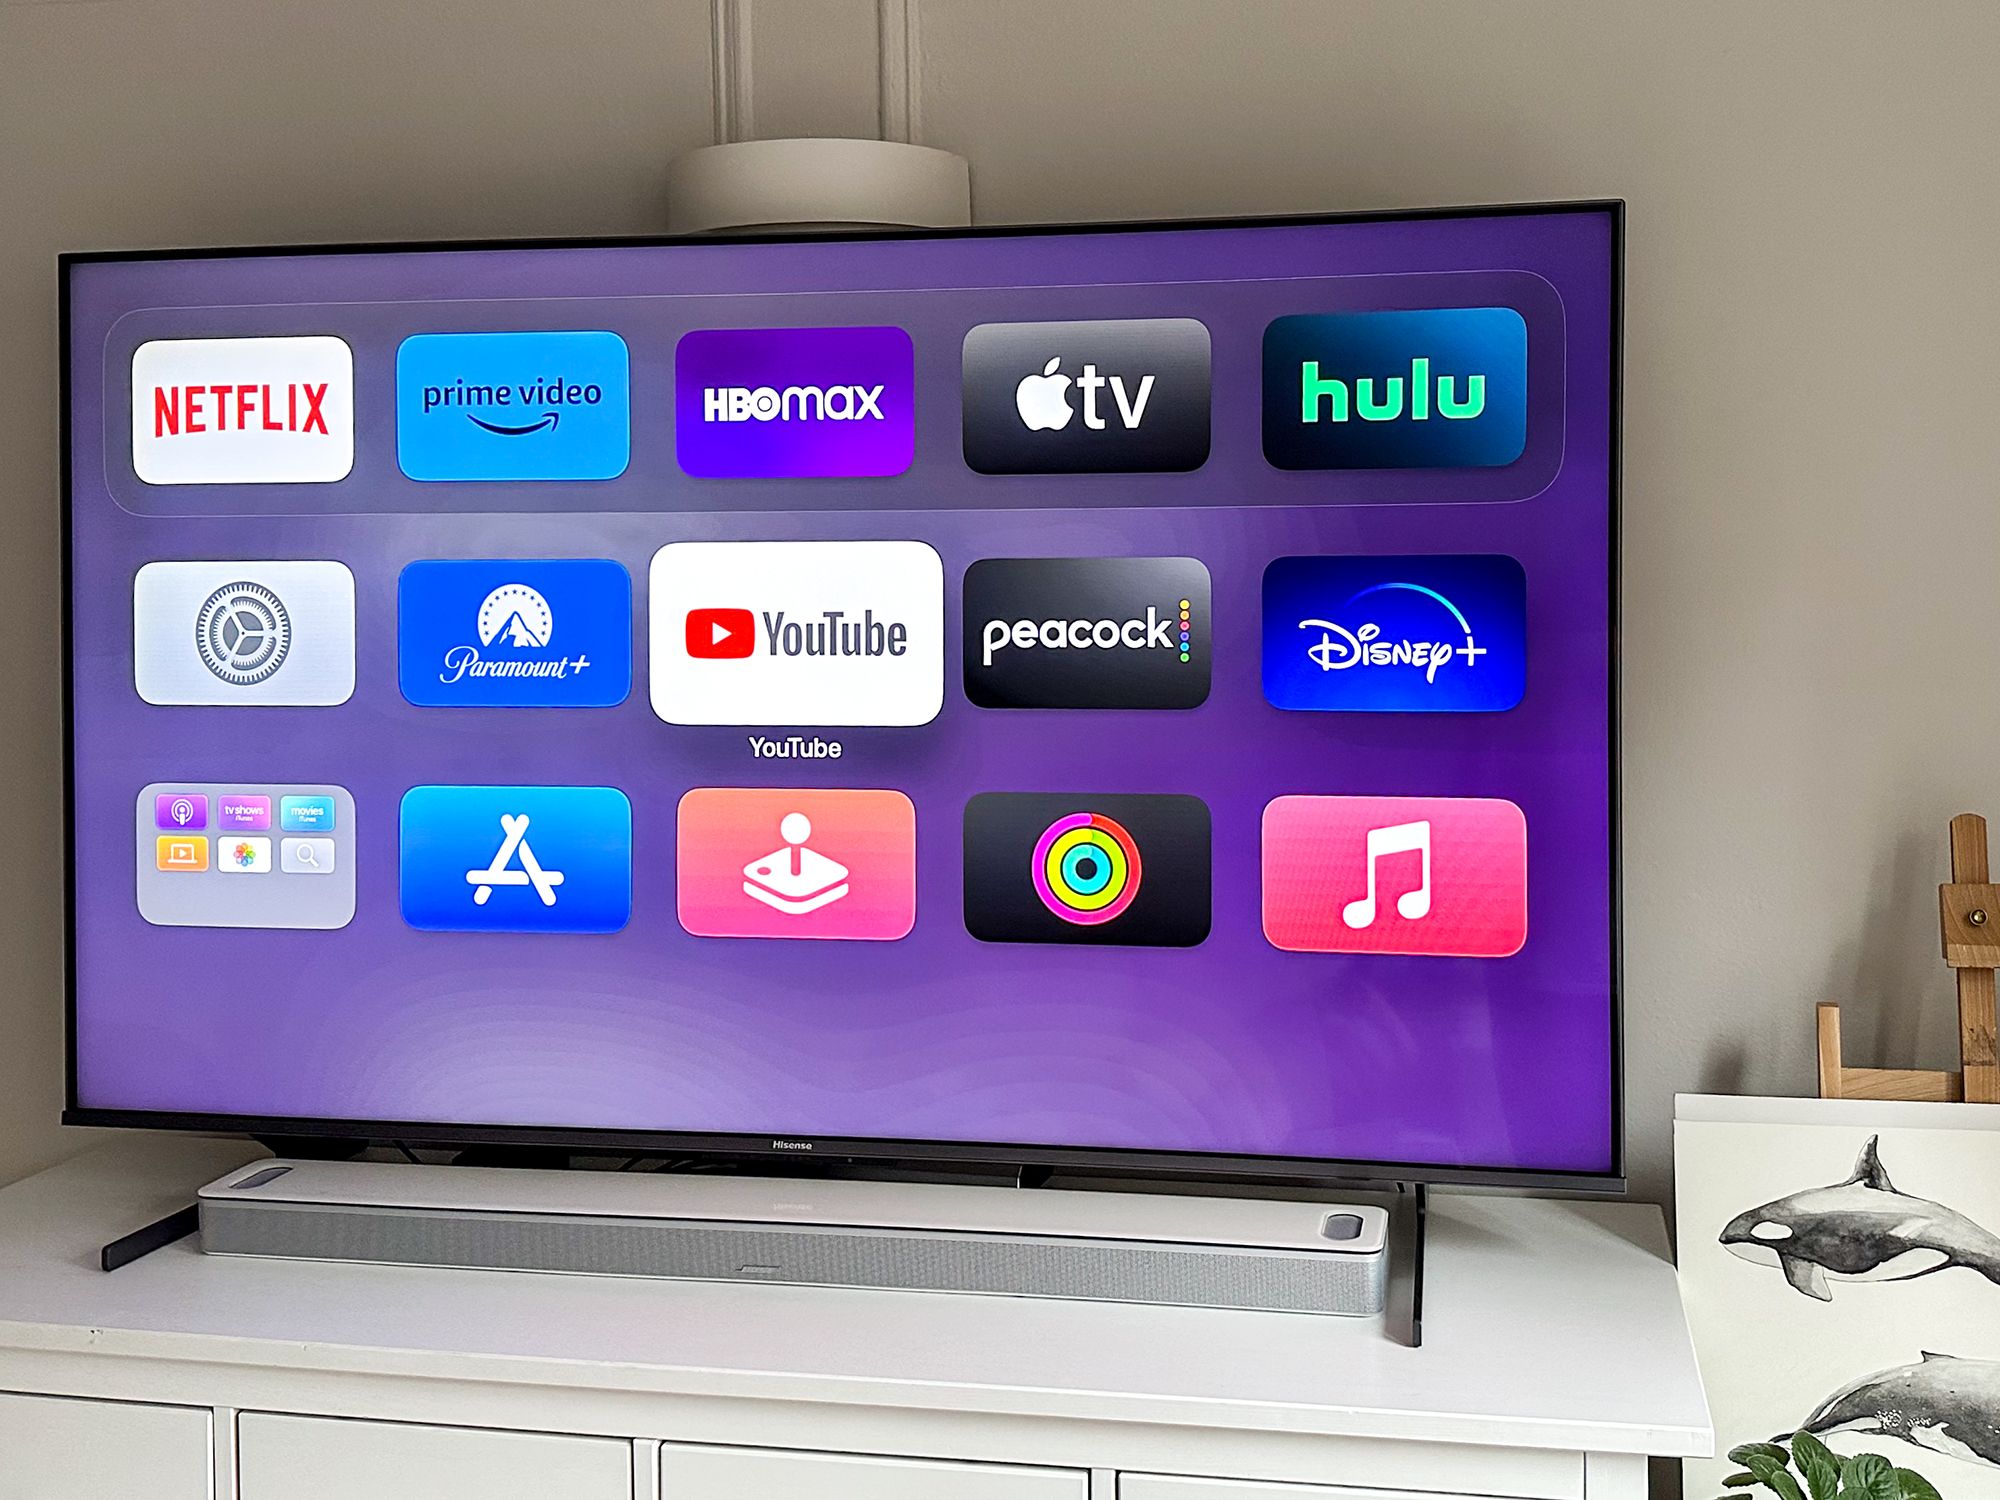 Apple TV 4K (3rd Generation) Review: The Best Streaming Player By a Mile